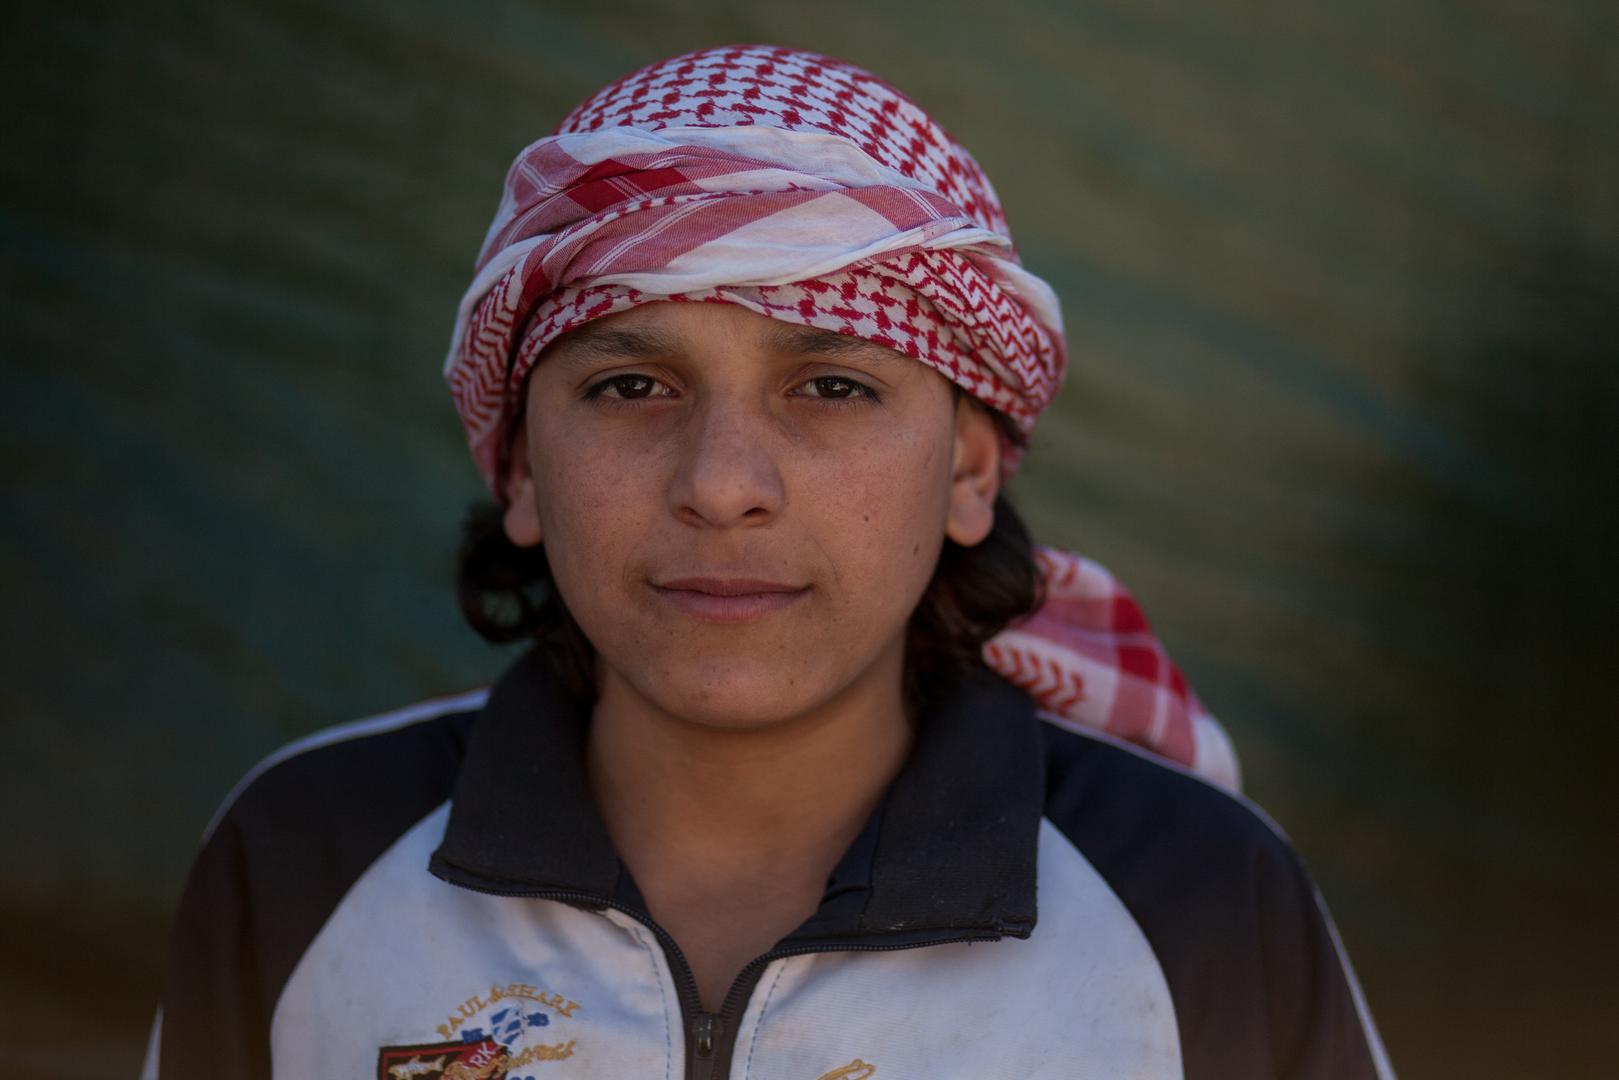 Fahd, 15, originally from Syria, is not in school. Instead, he works in construction in the Bekaa Valley.